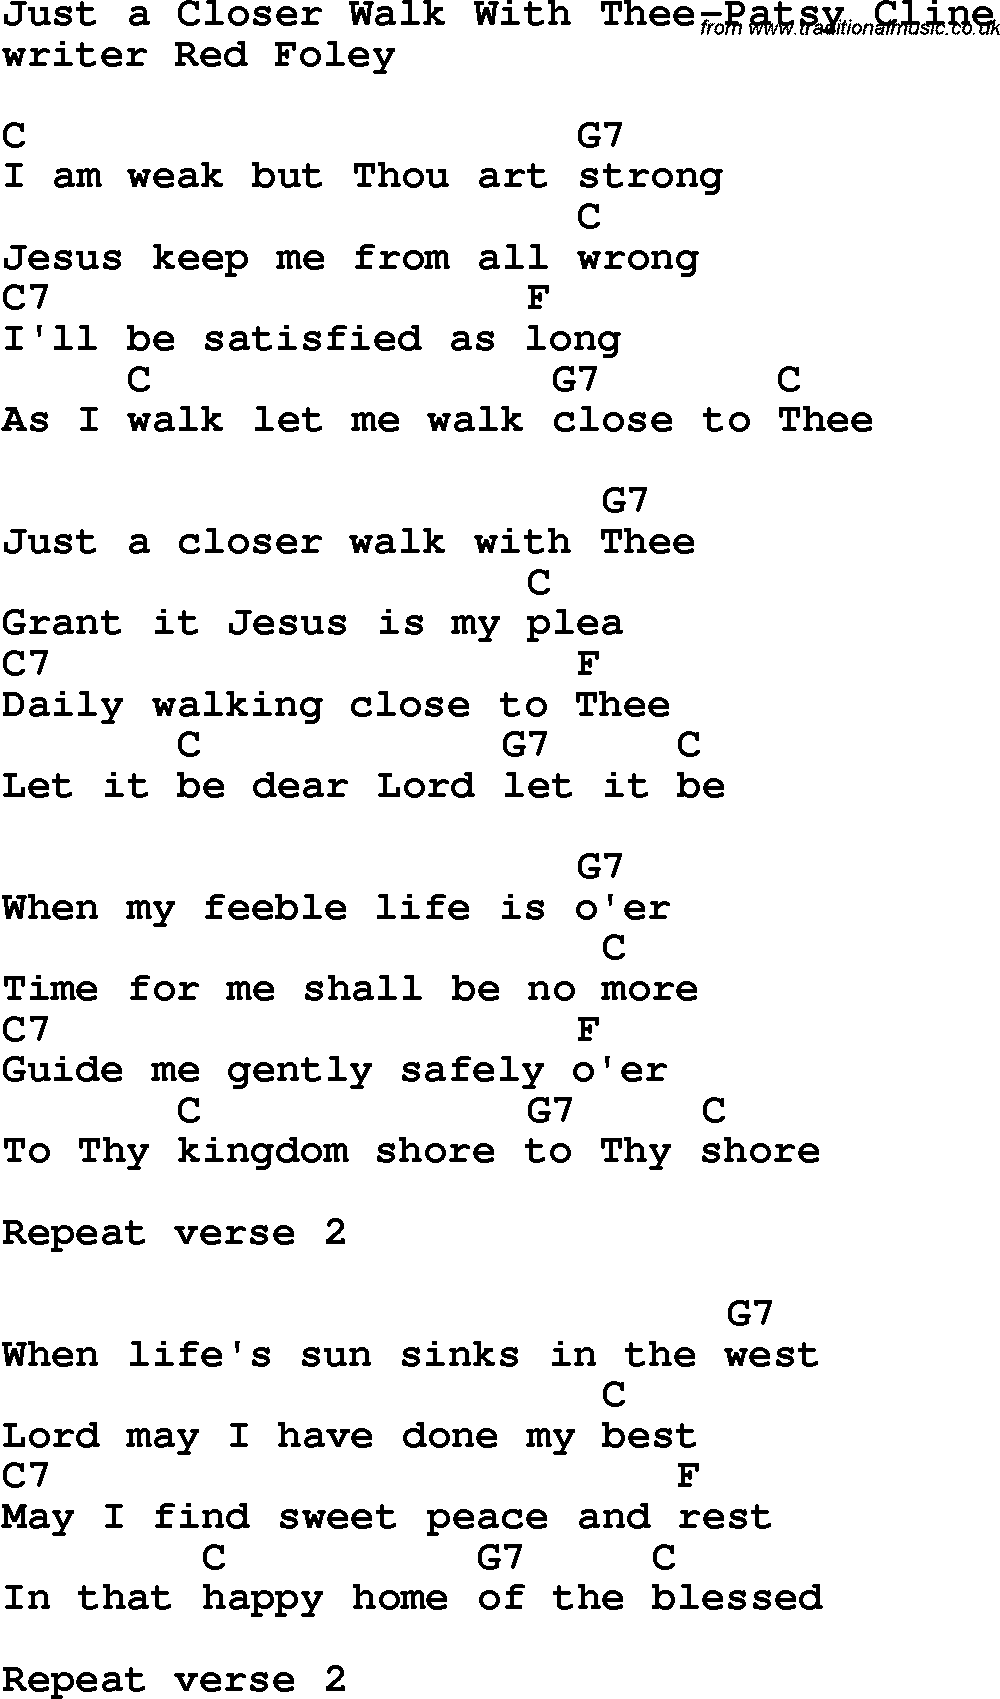 Country, Southern and Bluegrass Gospel Song Just a Closer Walk With Thee-Patsy Cline lyrics and chords